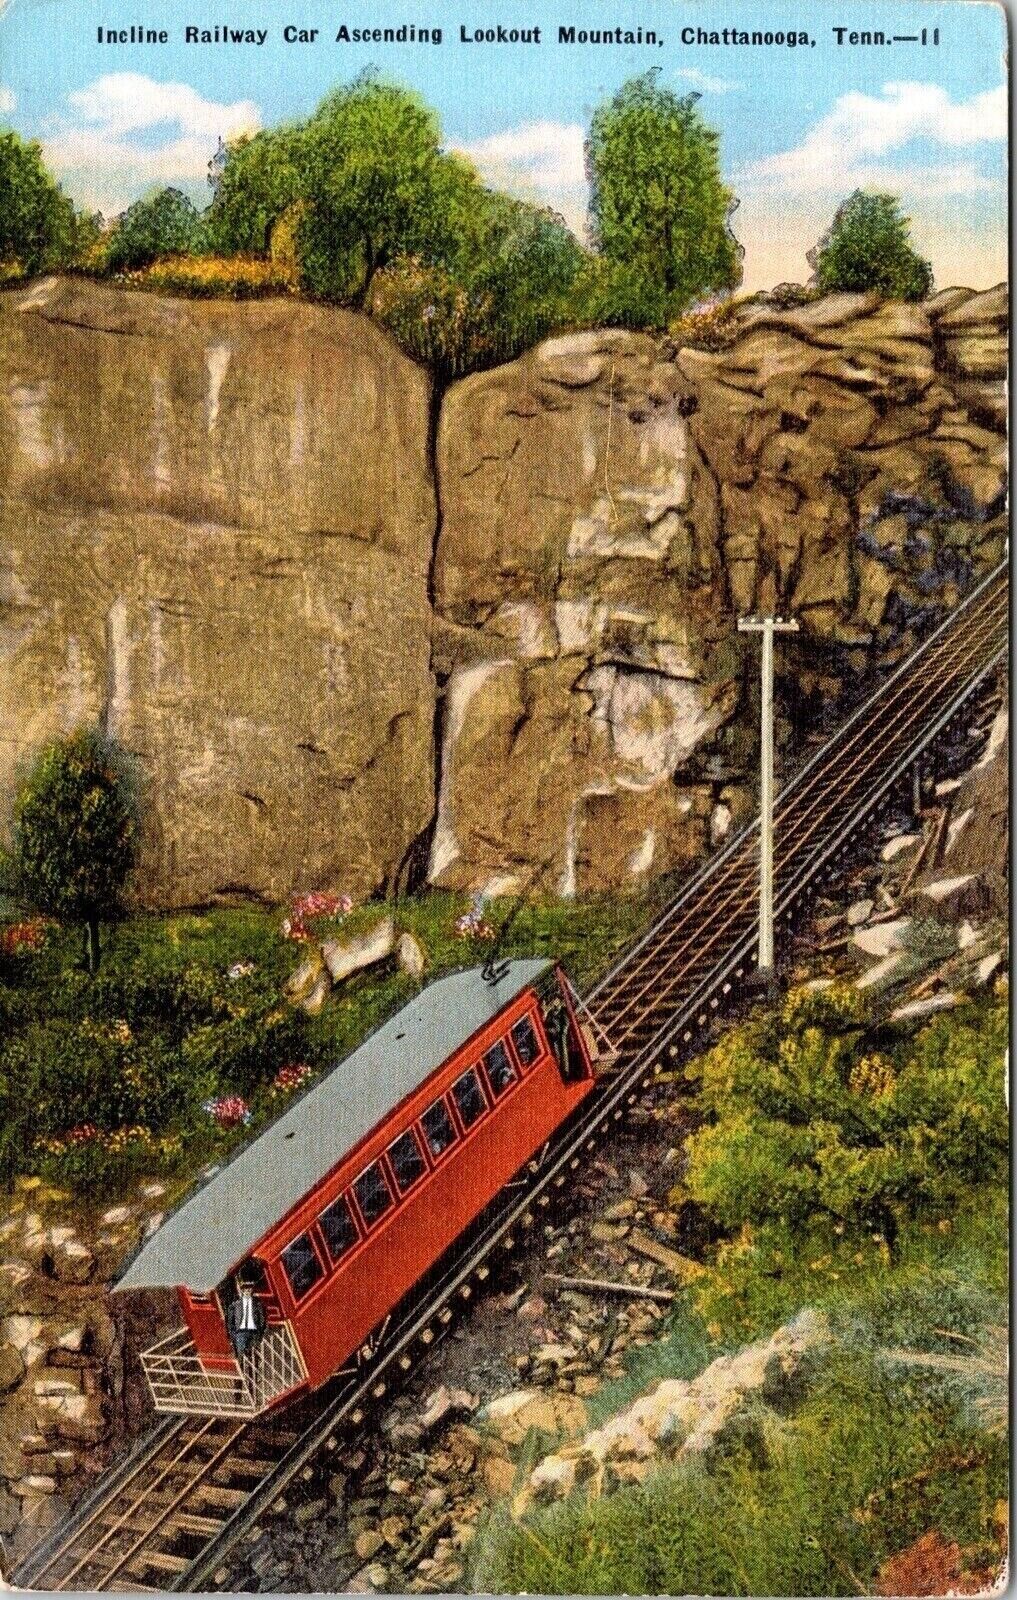 Chattanooga Tennessee Lookout Mountain Incline Railway Car DB Postcard